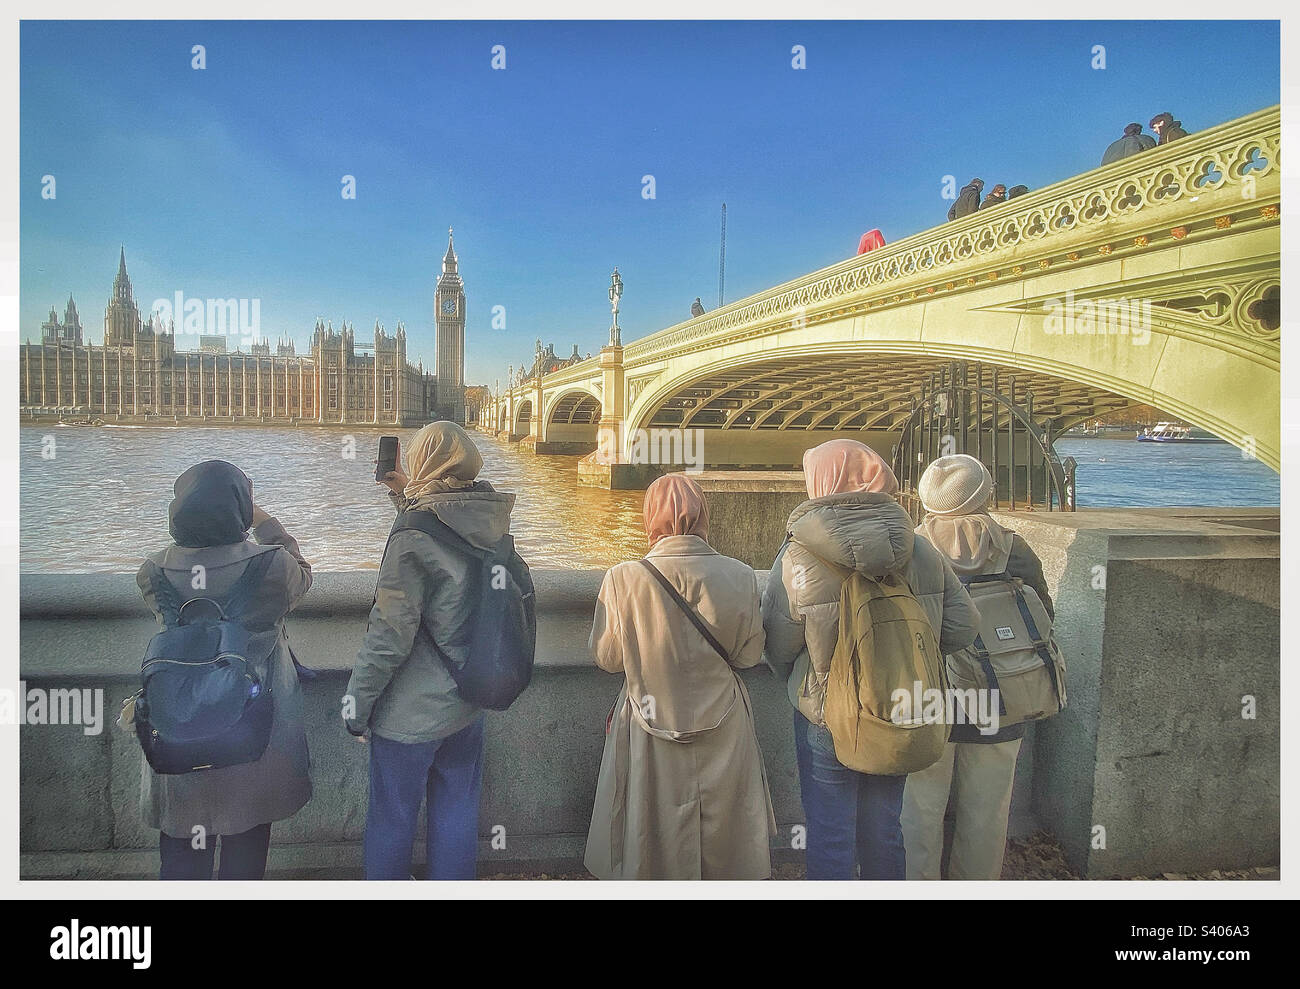 Tourists sightseeing in Westminster, London. Stock Photo